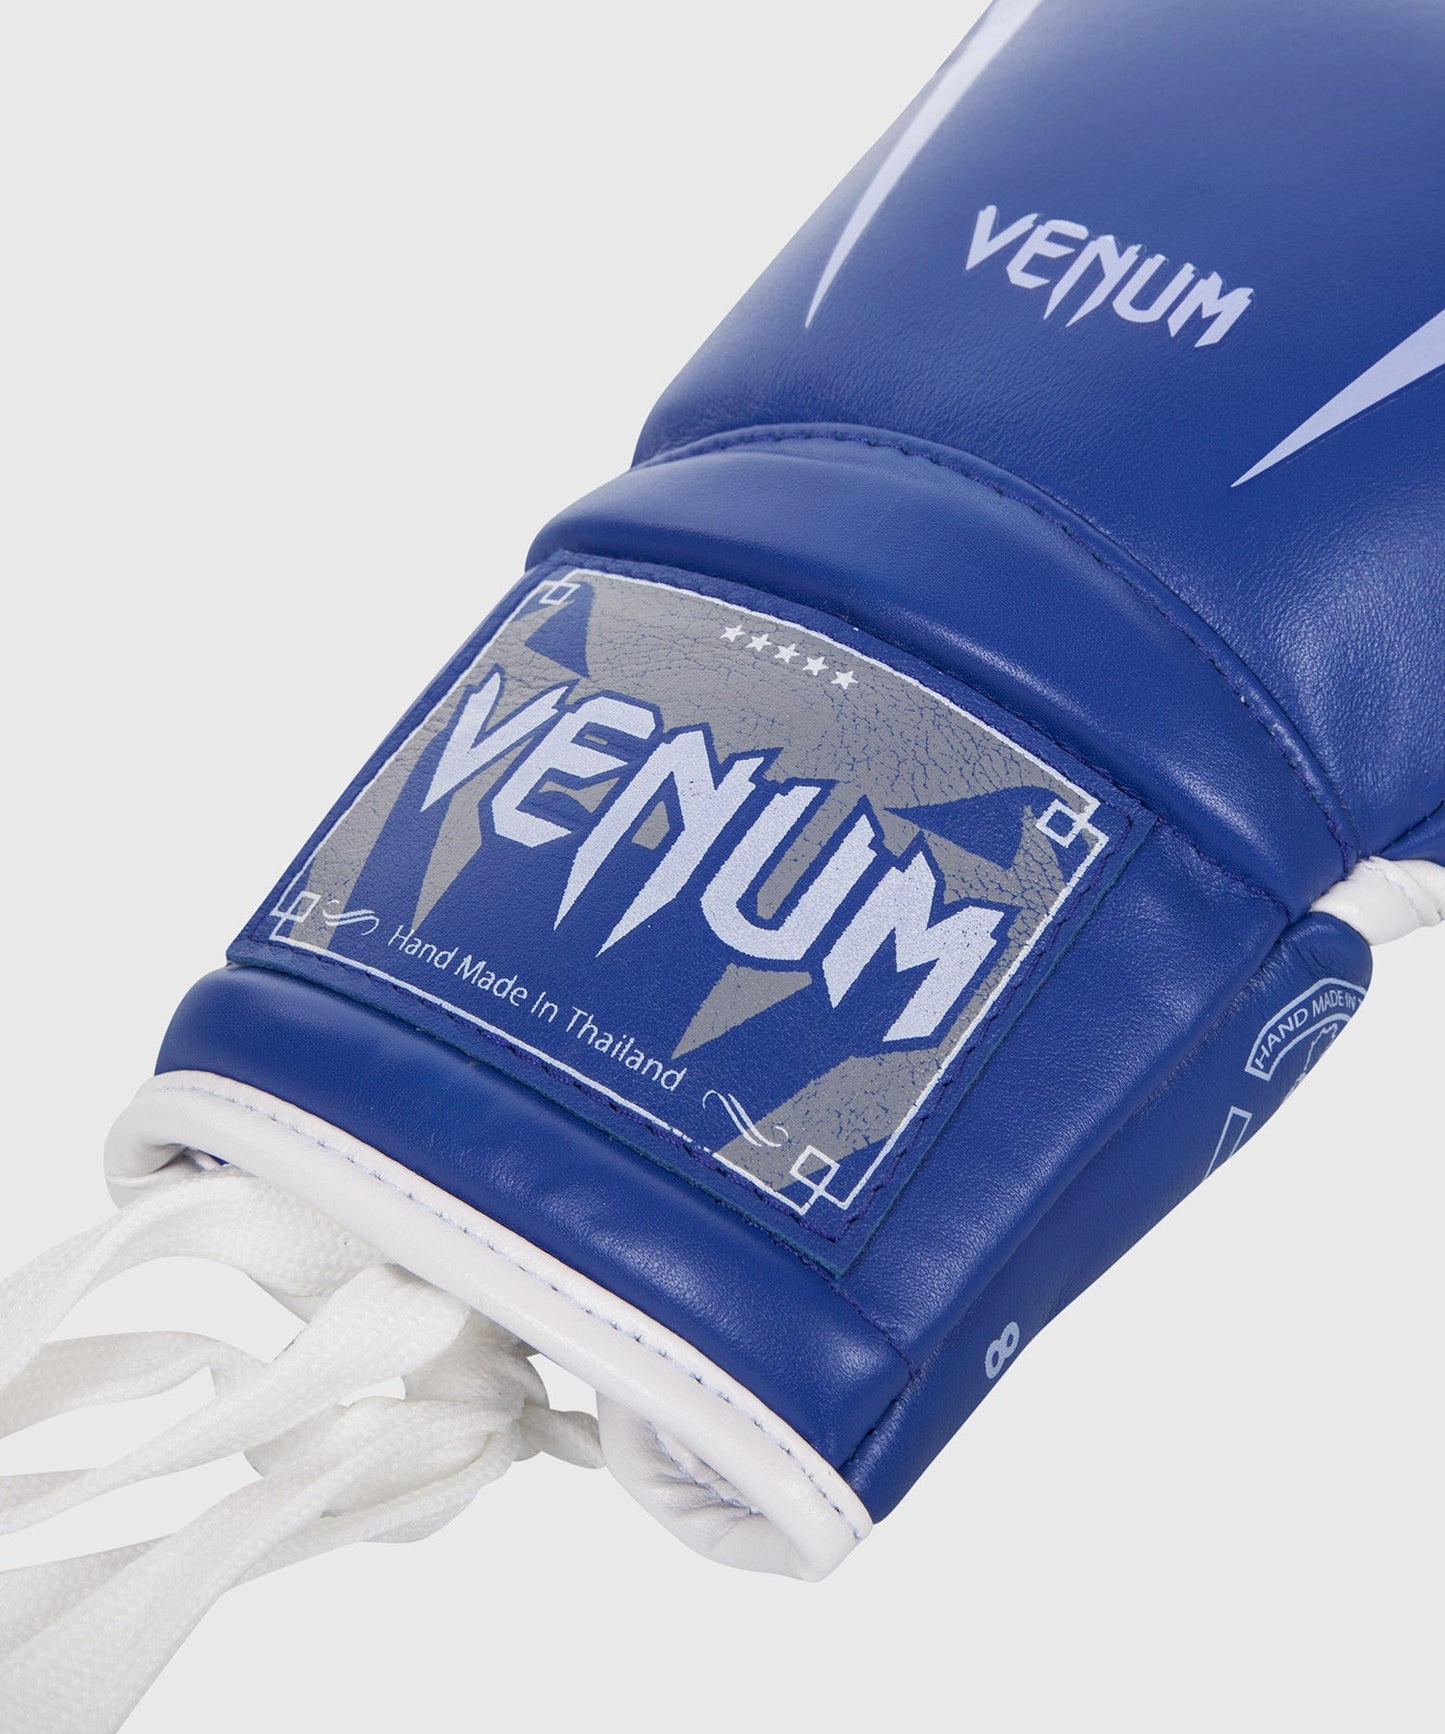 Venum Giant 3.0 Boxing Gloves - Nappa Leather - With Laces - Blue